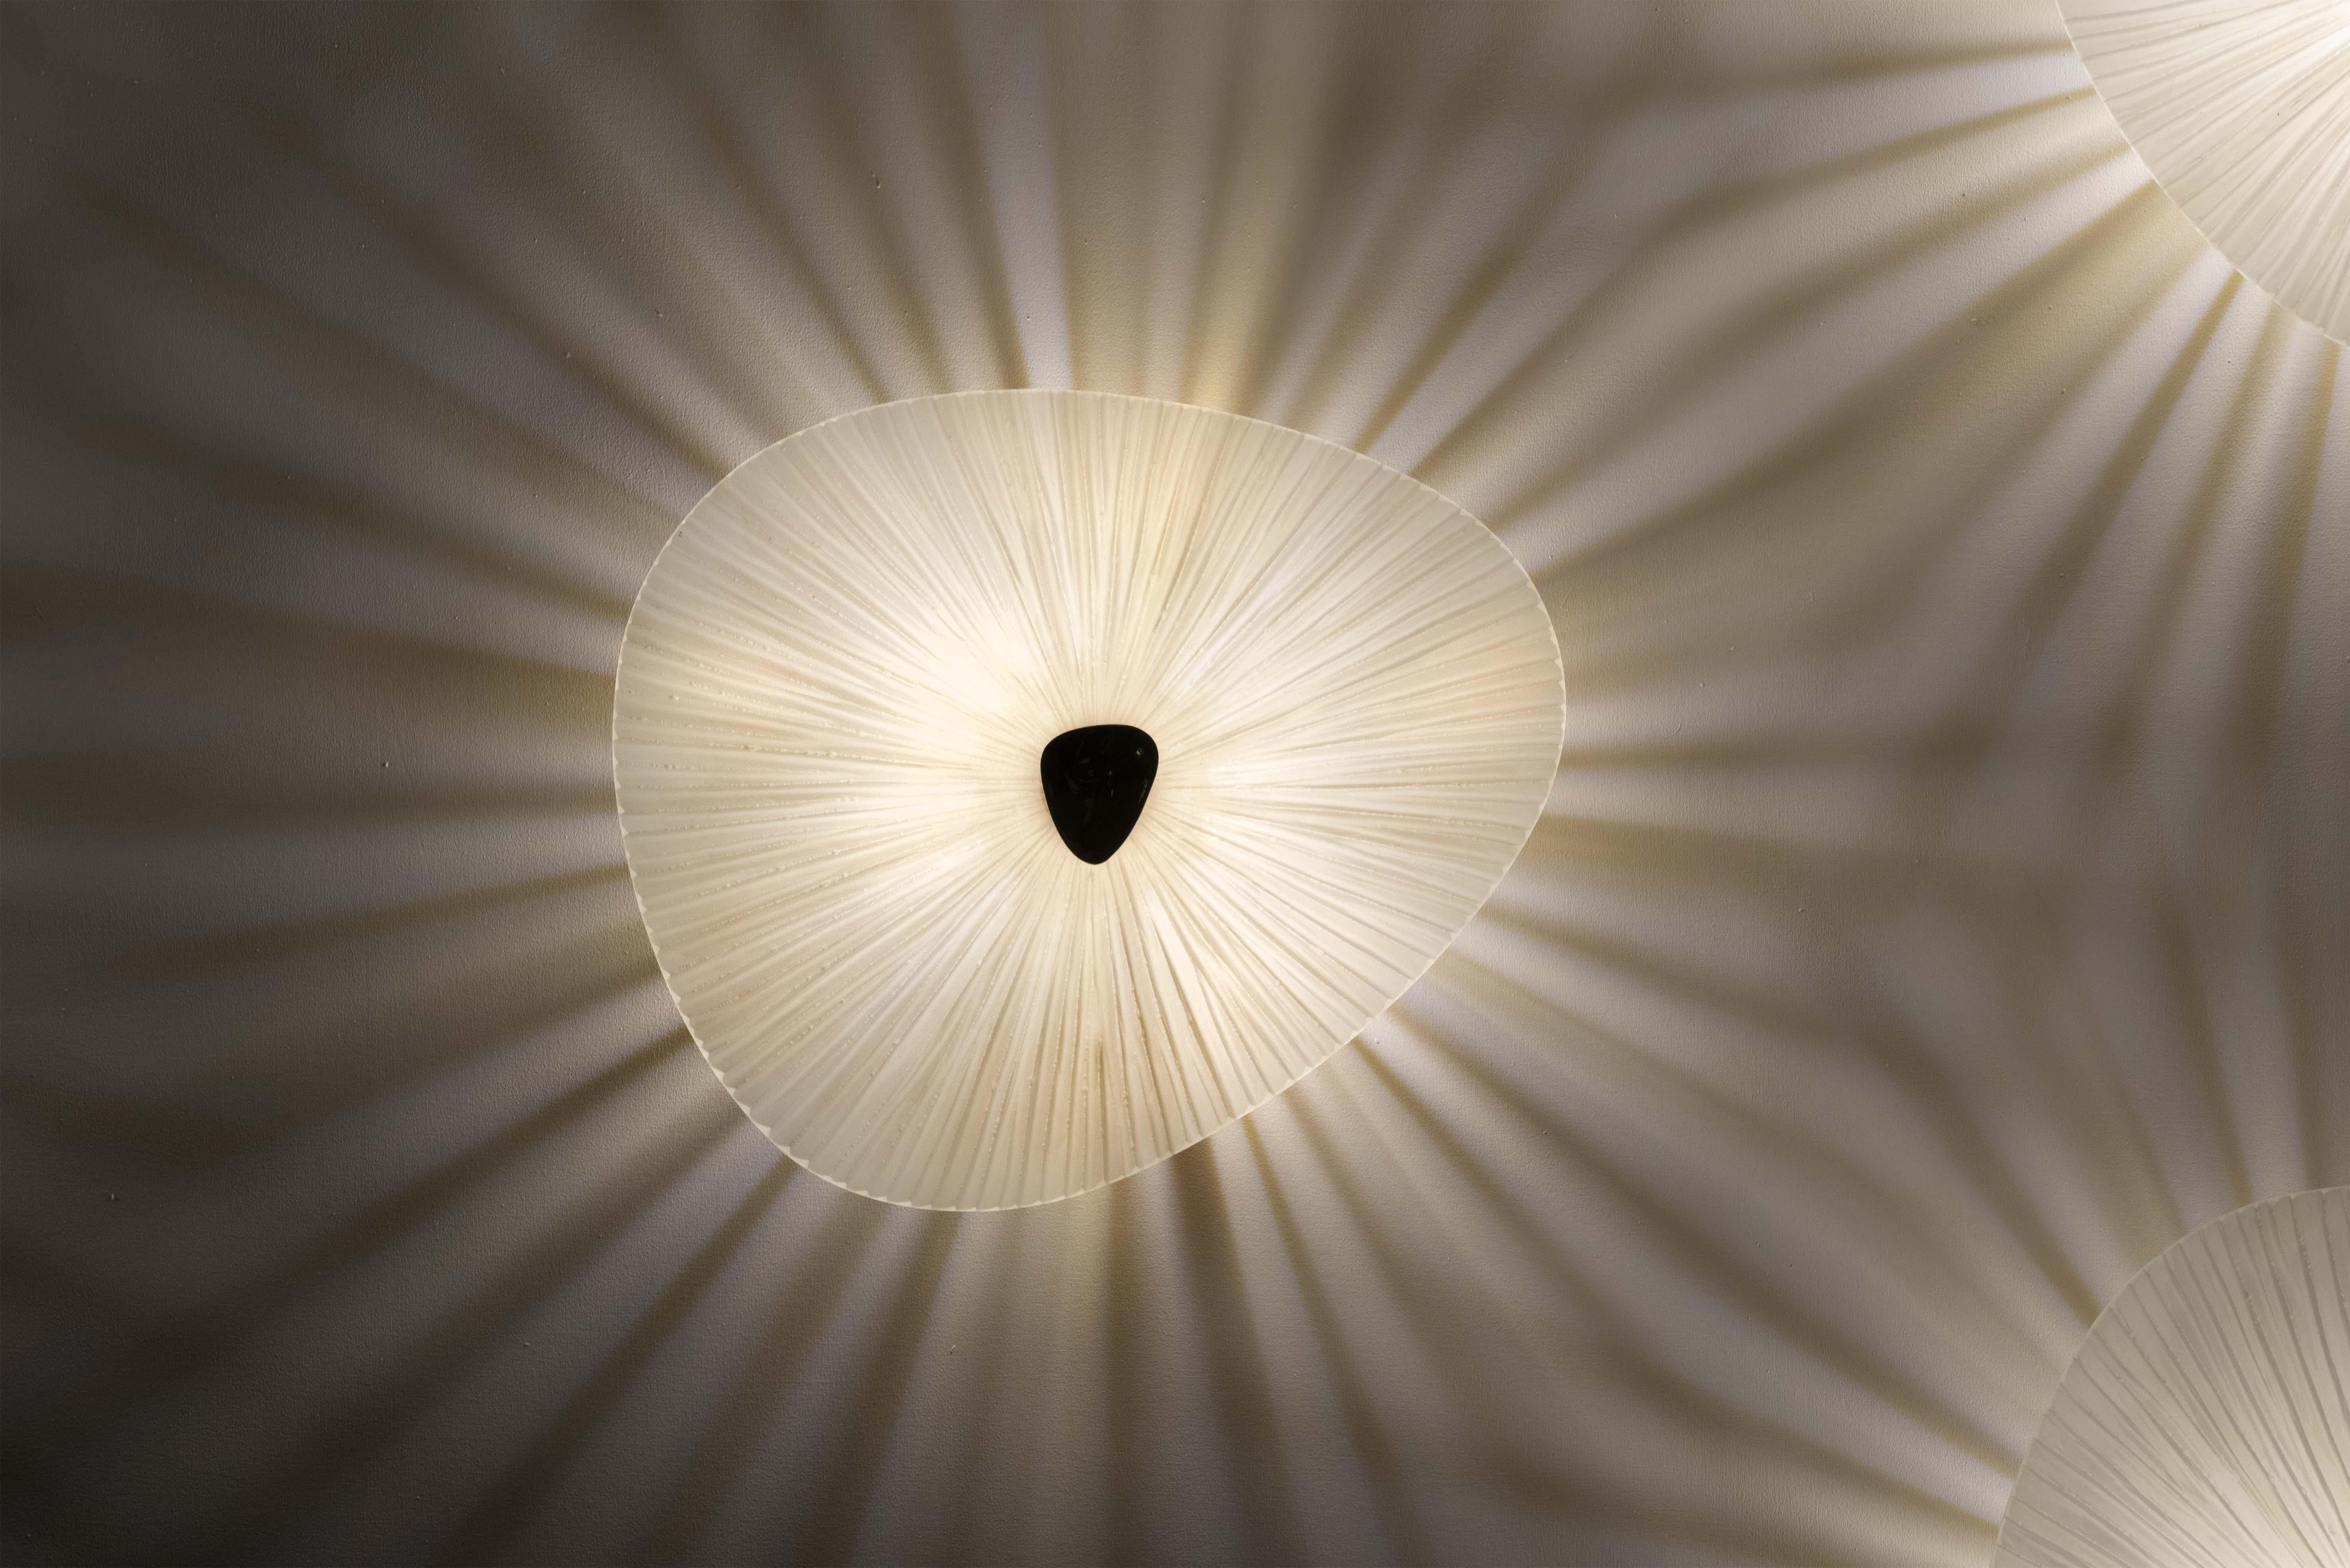 The 'Conchiglie' wall light is pure expression of refinement, elegance and attention to detail.
The crystal element (extra-light and satin white crystal) have been curved and hand crafted.
The support structure is in 24 kt gold plated brass with a